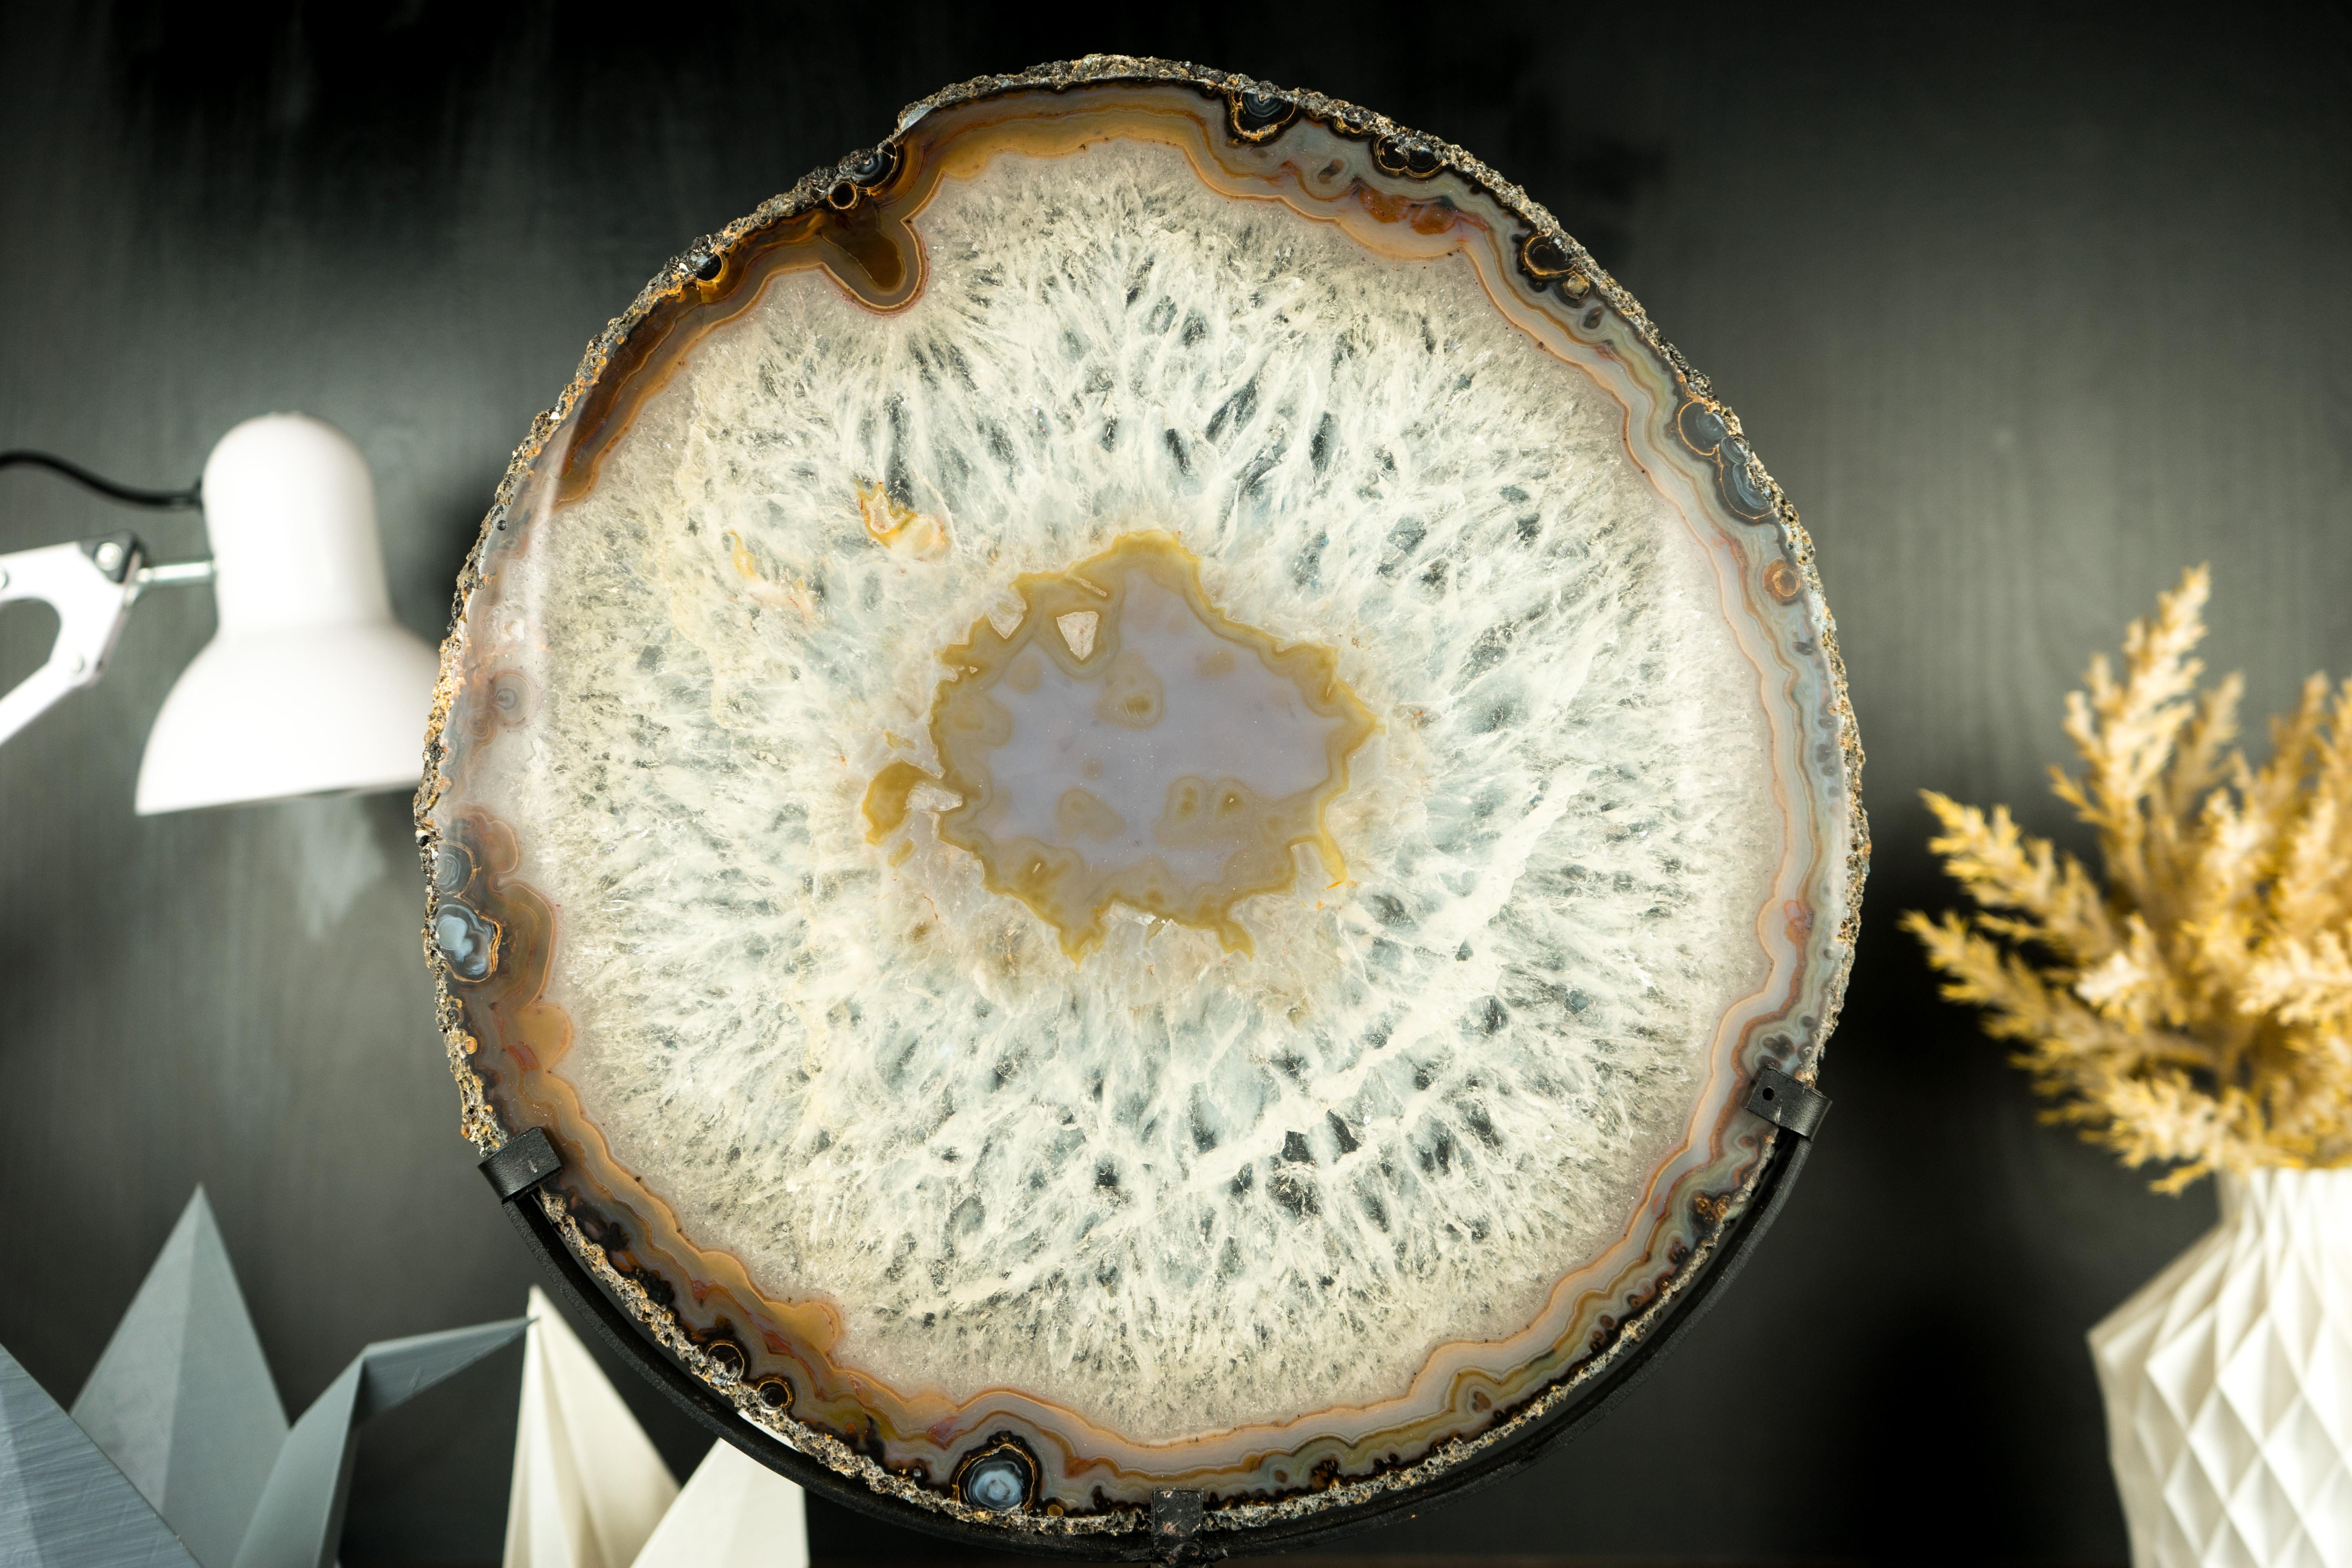 World-Class Large Lace Agate Slice, with Ice-Like Crystal and Colorful Agate For Sale 2